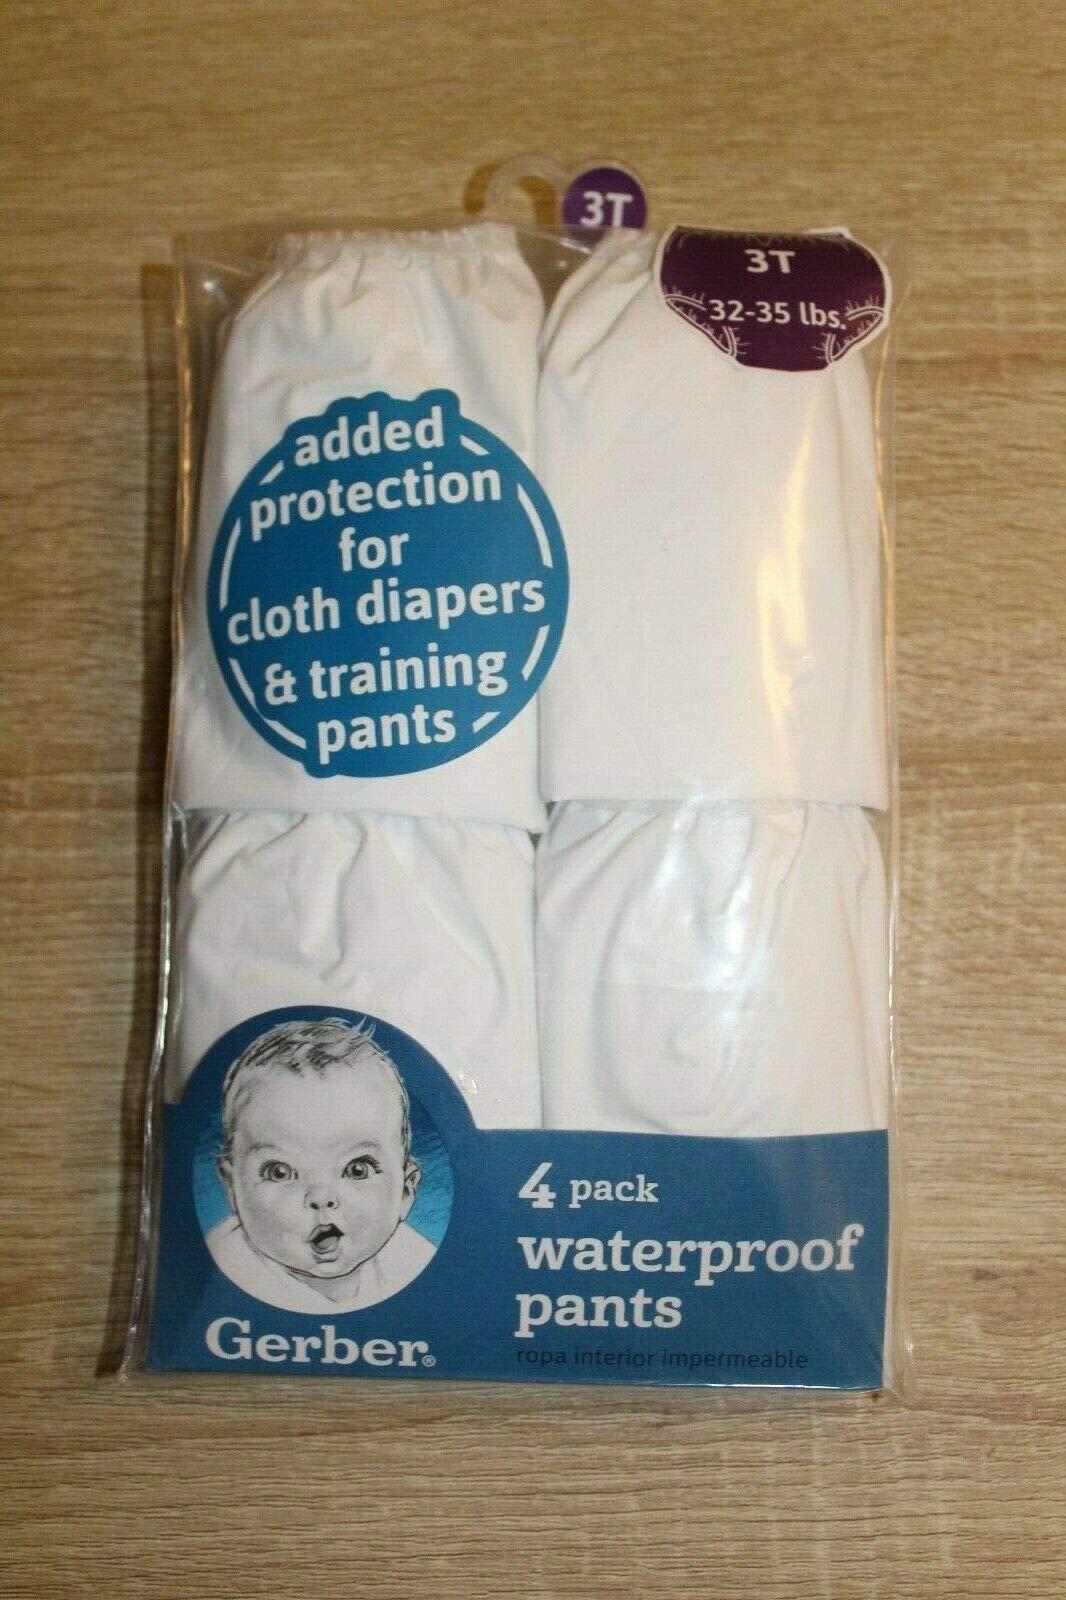 Gerber Plastic Pants, 3T, Fits 32-35 lbs. (4 Pairs) 8 Count (Pack